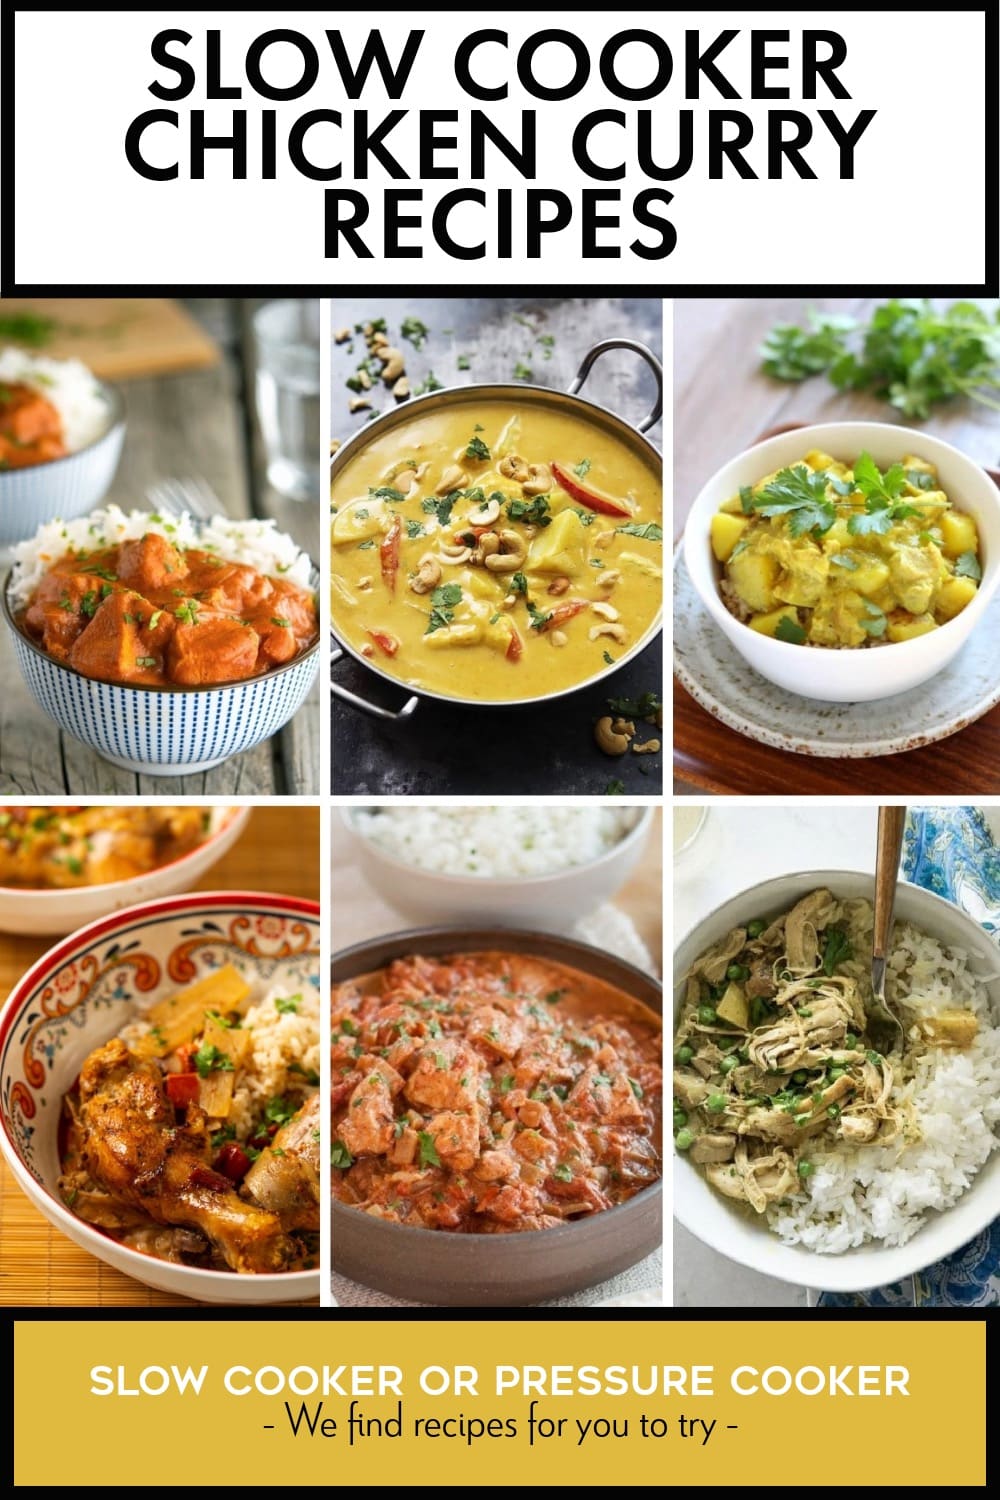 Pinterest image of Slow Cooker Chicken Curry Recipes